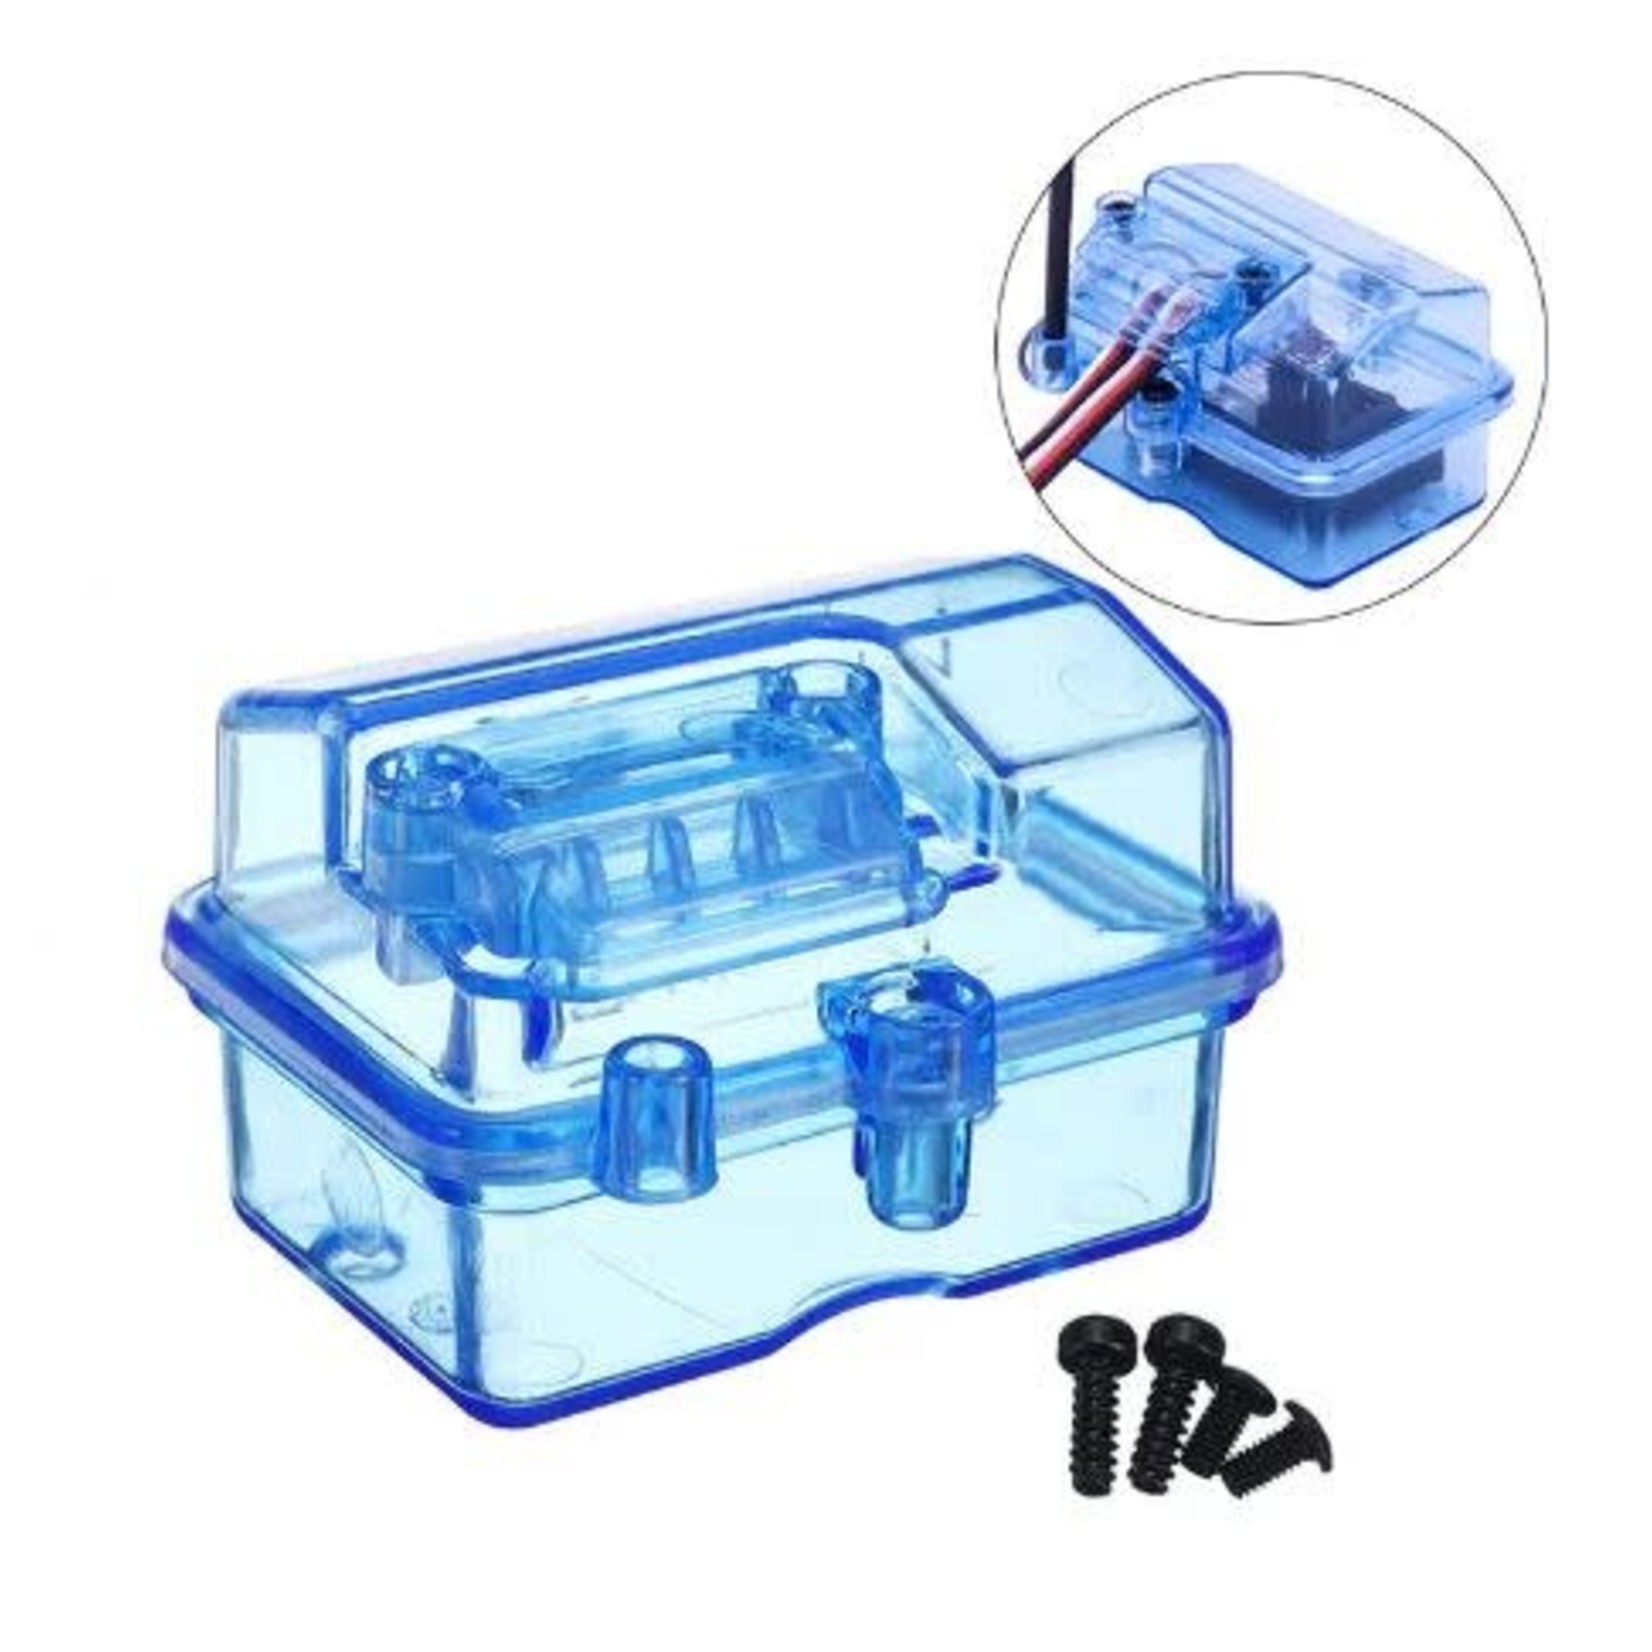 INTEGY Clear Plastic Waterproof Receiver Box for RC Boat C30028